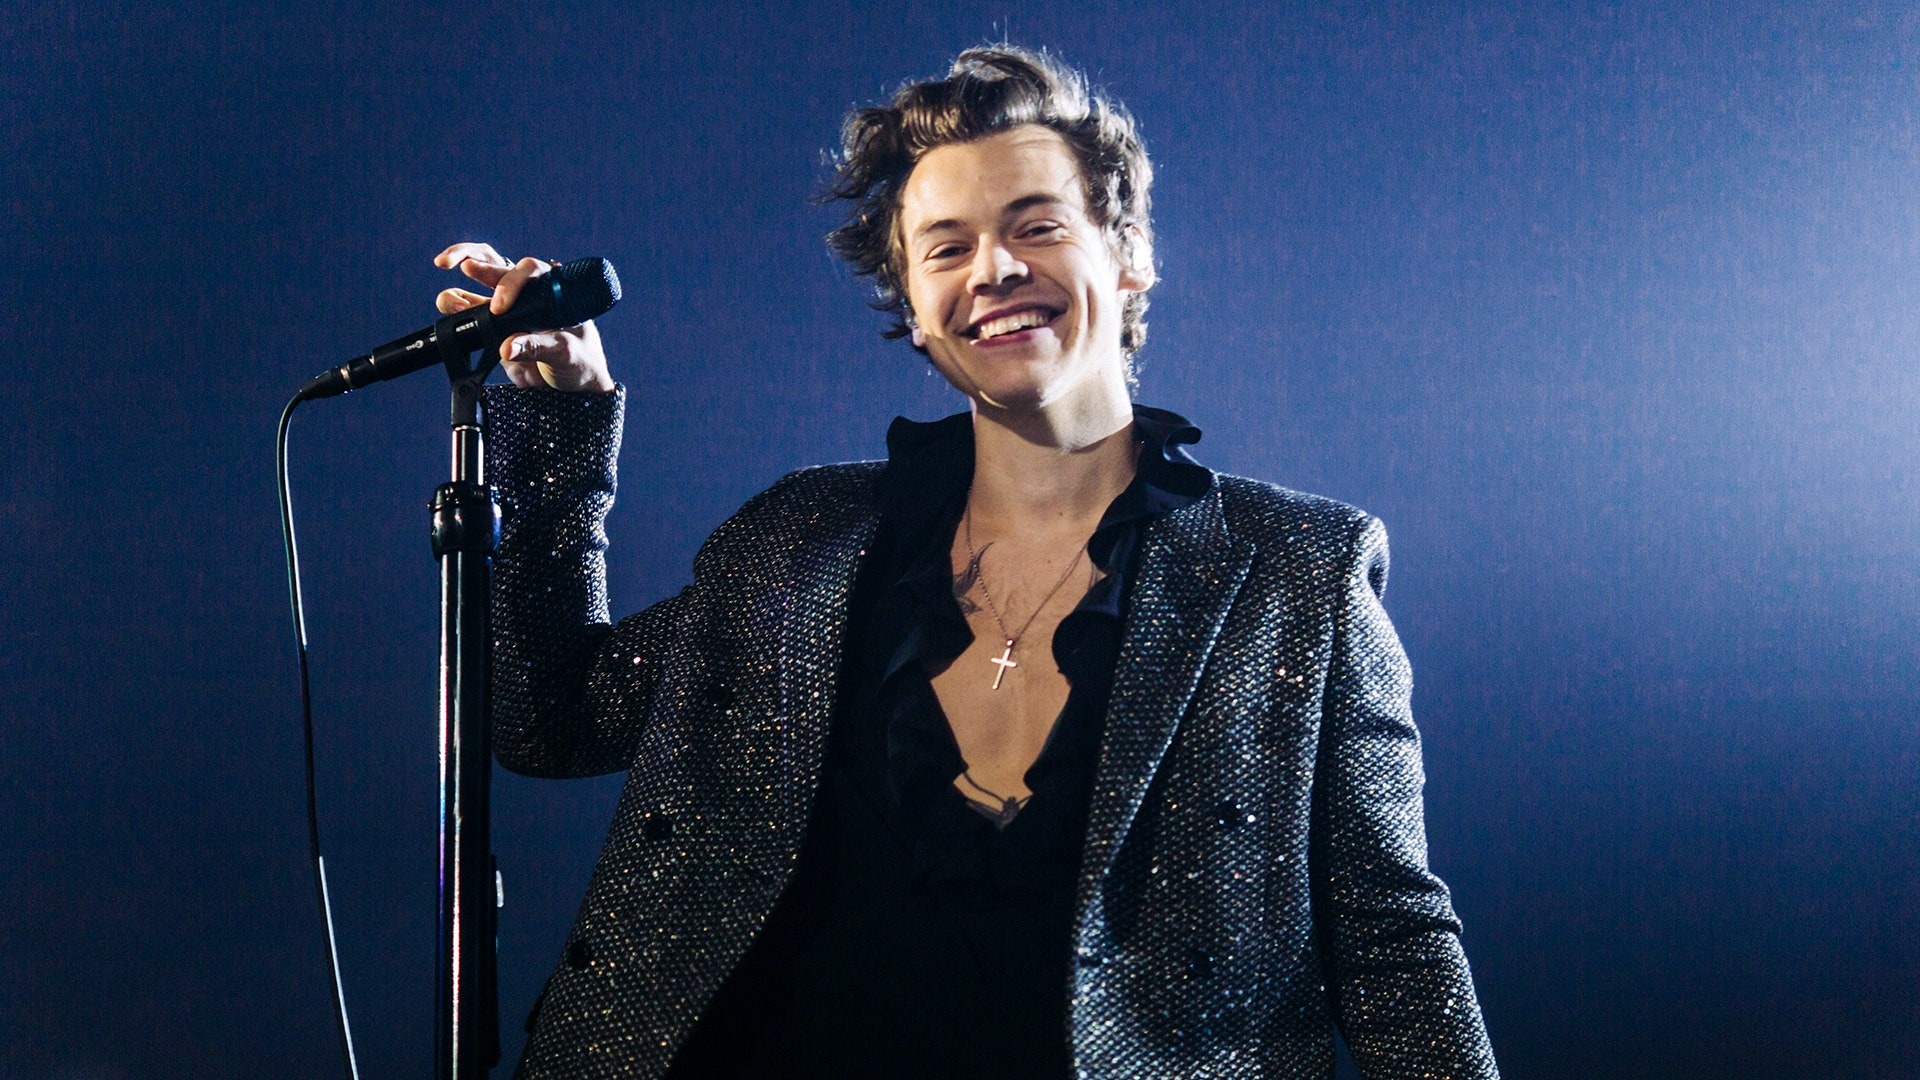 Harry Styles Shows Off His Solo-Fashion Style - The Outlook